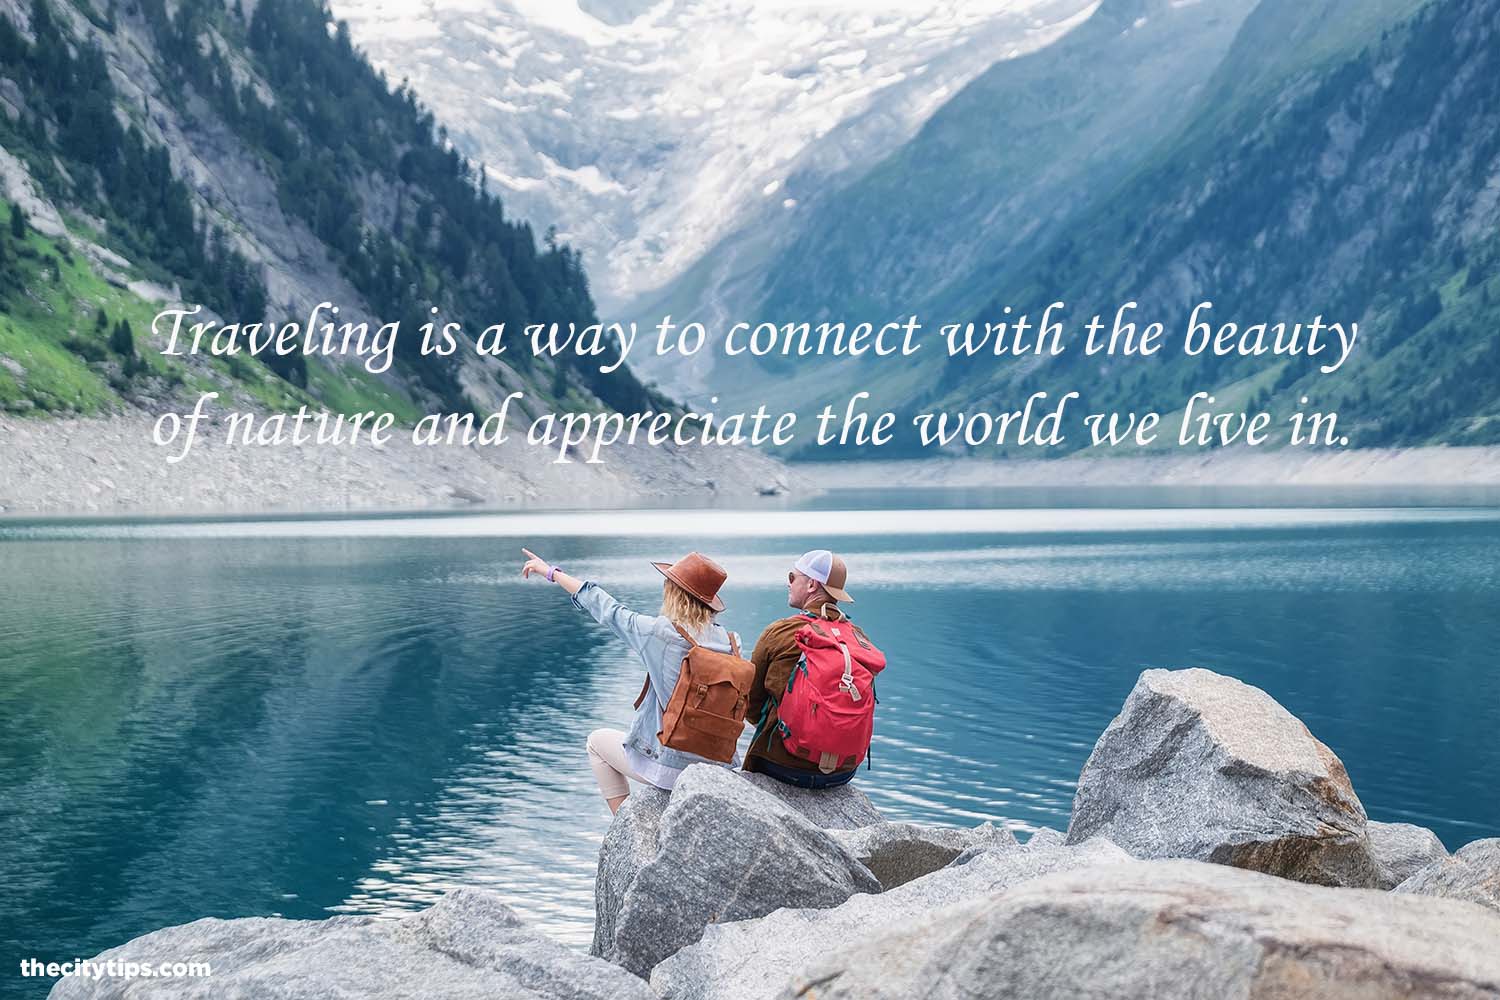 "Traveling is a way to connect with the beauty of nature and appreciate the world we live in." by Anonymous